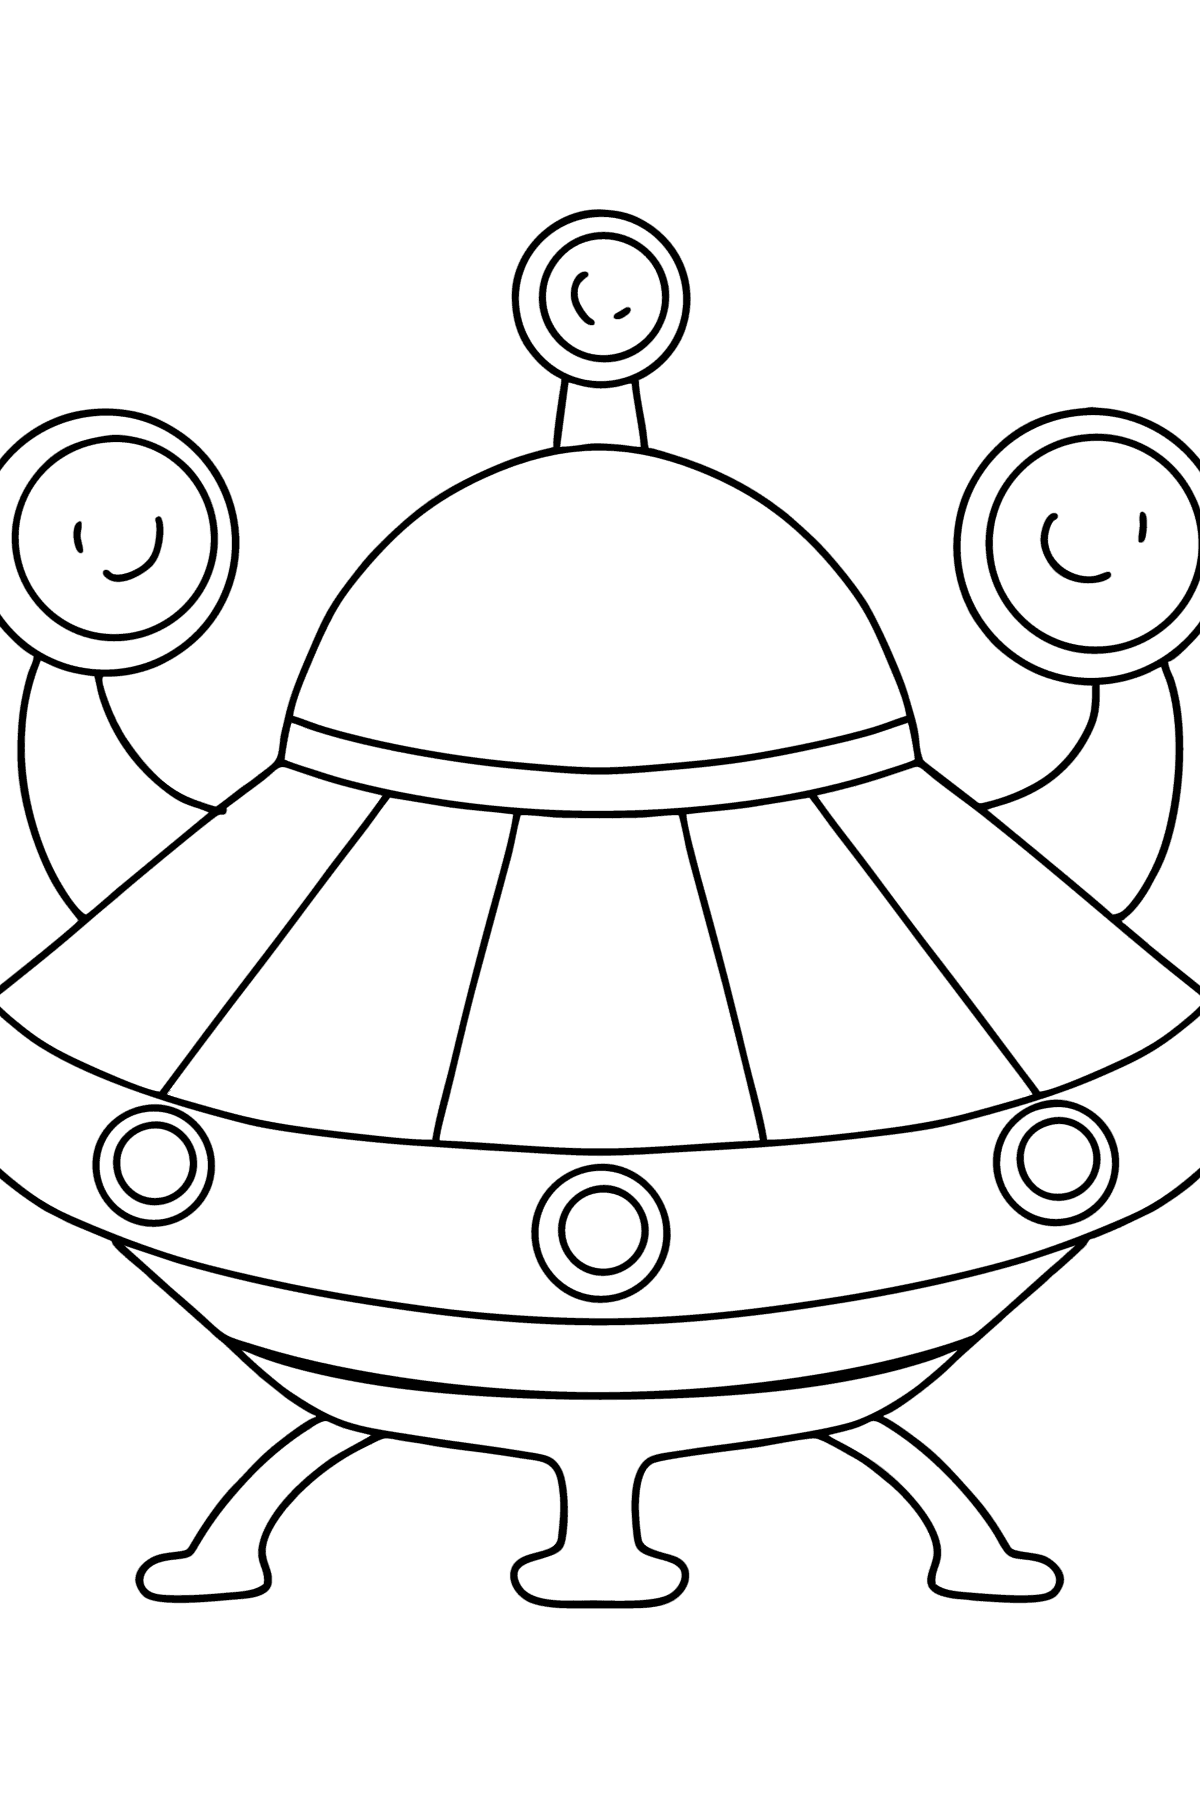 Alien spaceship coloring pages - Coloring Pages for Kids